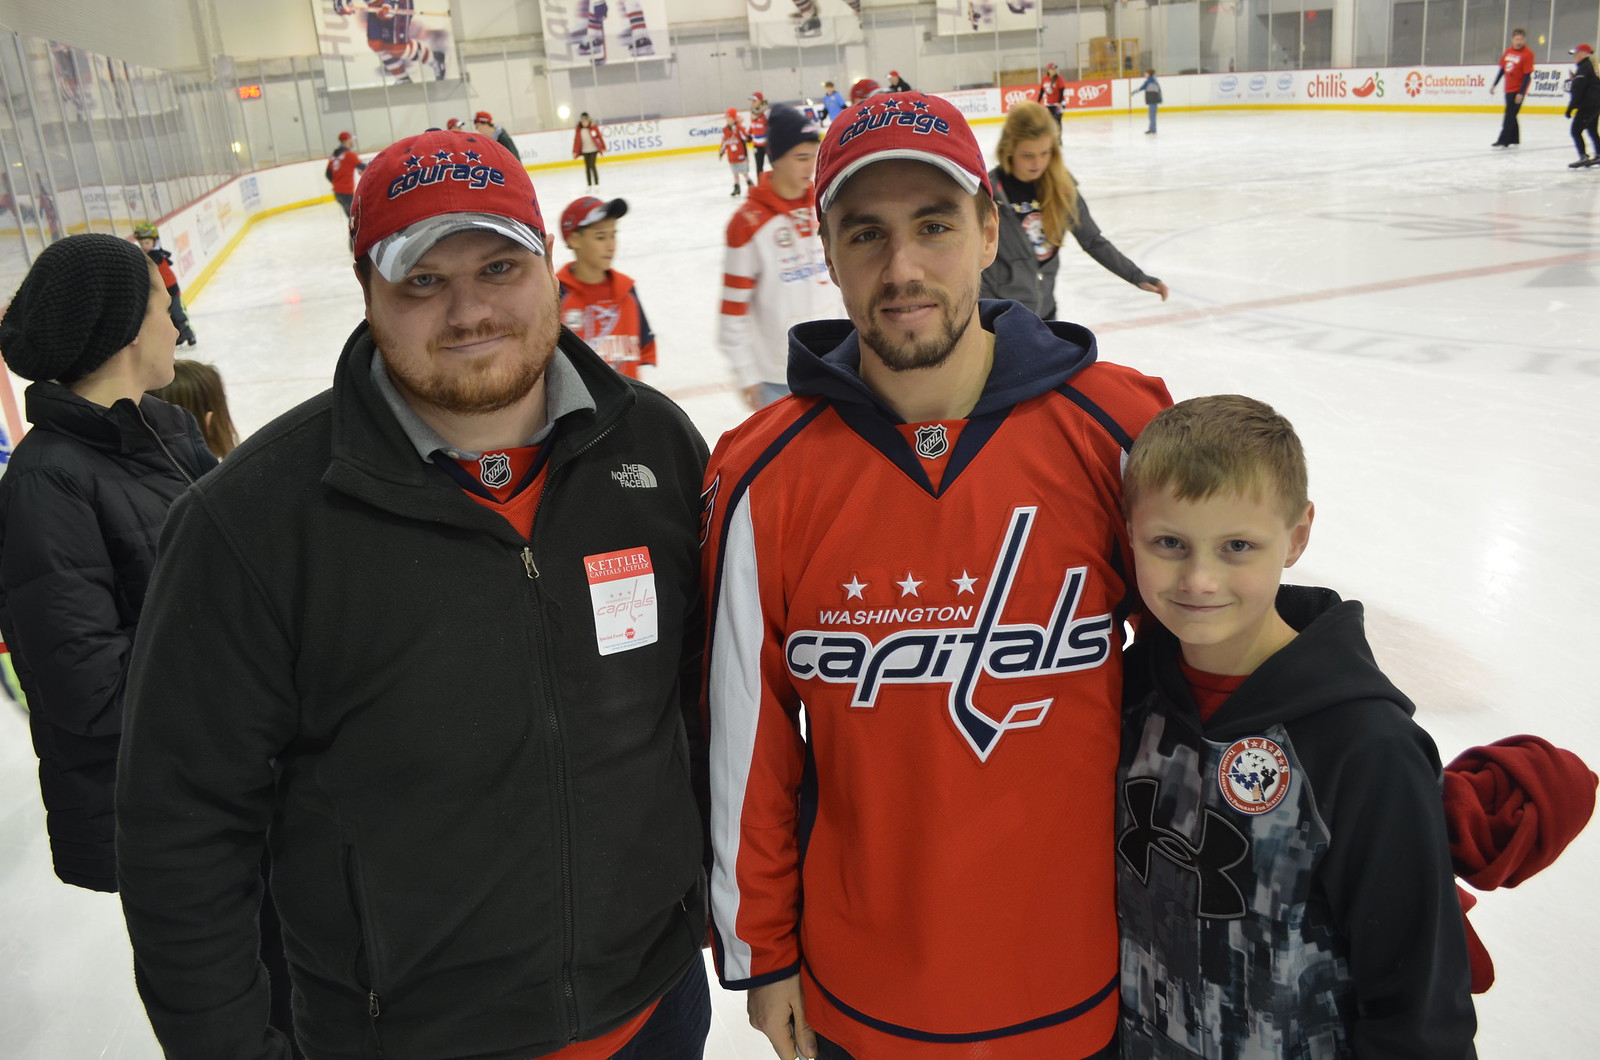 2016_T4T_Skate with Washington Capitals 21